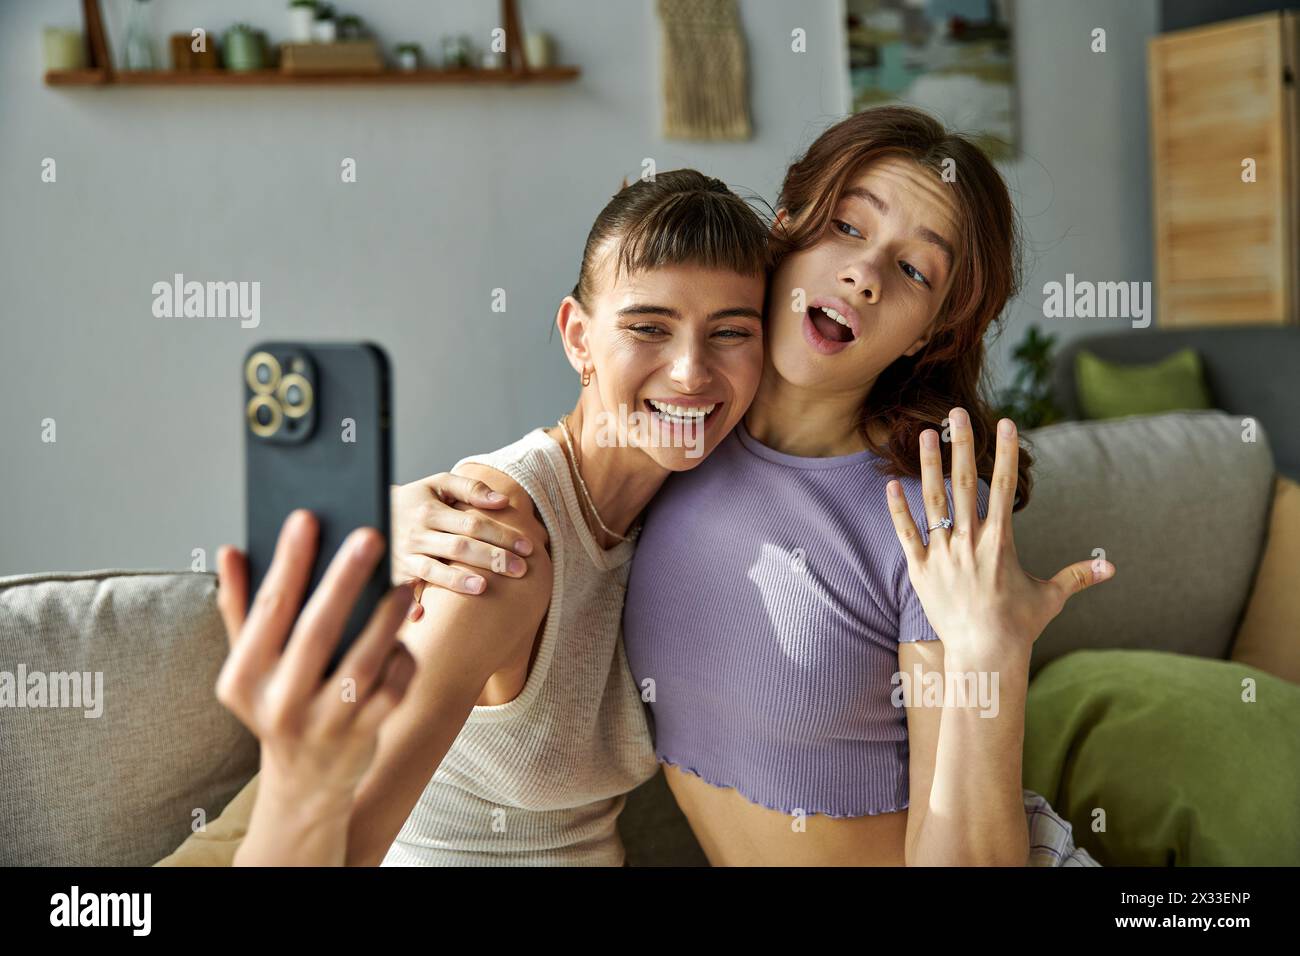 Beautiful lesbian couple in comfy attire sitting closely on a couch. Stock Photo